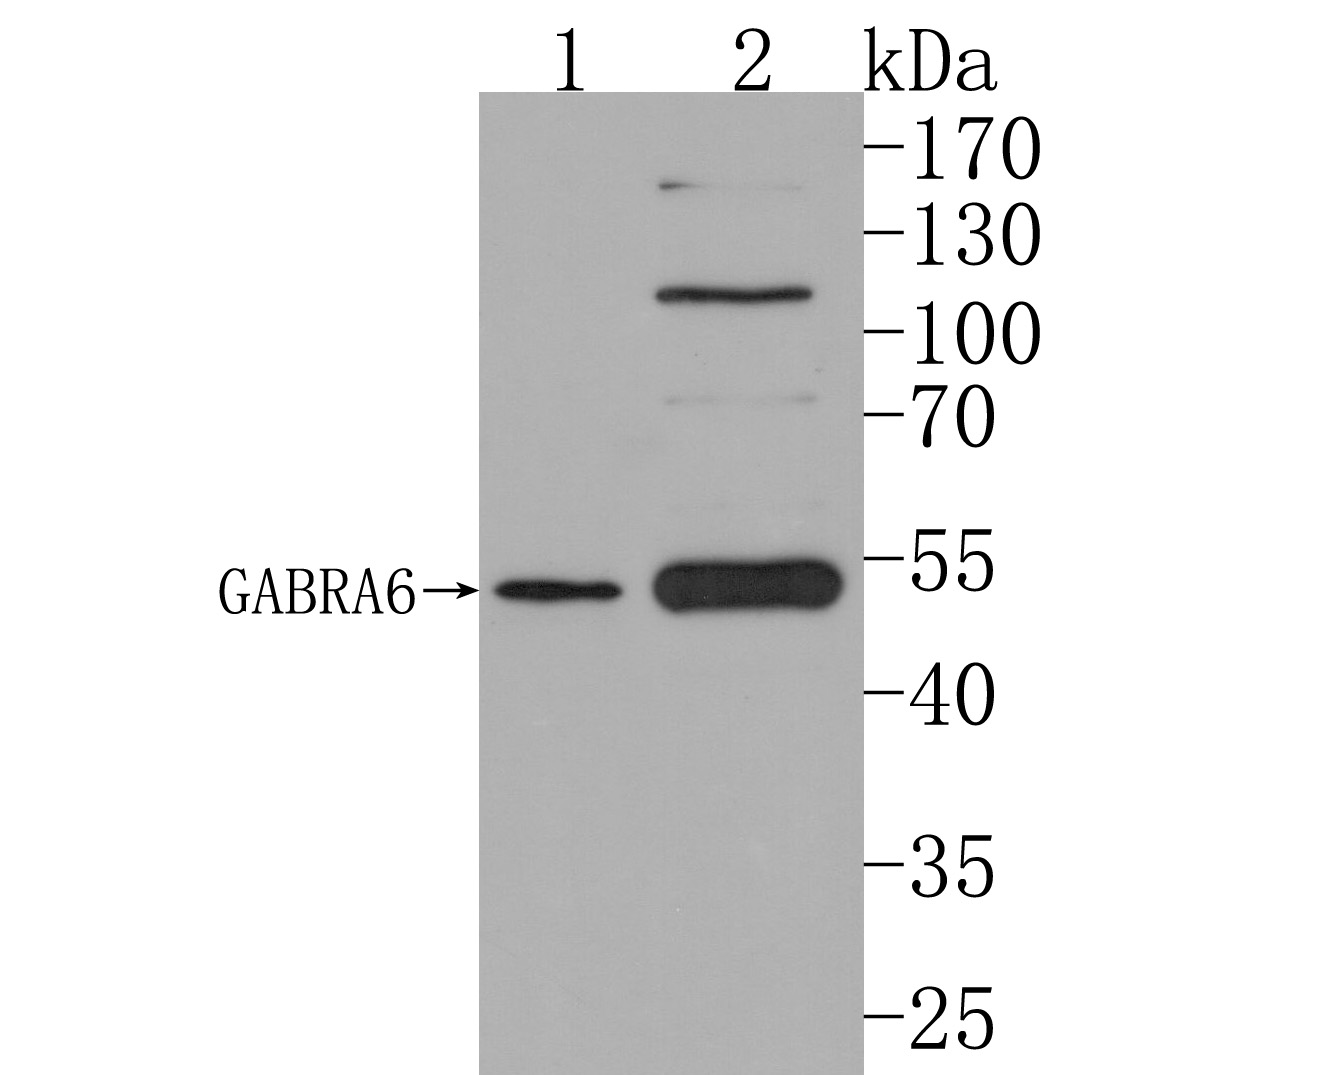 Western blot analysis of GABA A Receptor alpha 6 on different lysates. Proteins were transferred to a PVDF membrane and blocked with 5% NFDM/TBST for 1 hour at room temperature. The primary antibody (HA500473, 1/1,000) was used in 5% NFDM/TBST at room temperature for 2 hours. Goat Anti-Rabbit IgG - HRP Secondary Antibody (HA1001) at 1:200,000 dilution was used for 1 hour at room temperature.<br />
Positive control: <br />
Lane 1: Jurkat cell lysate<br />
Lane 2: PC-3 cell lysate